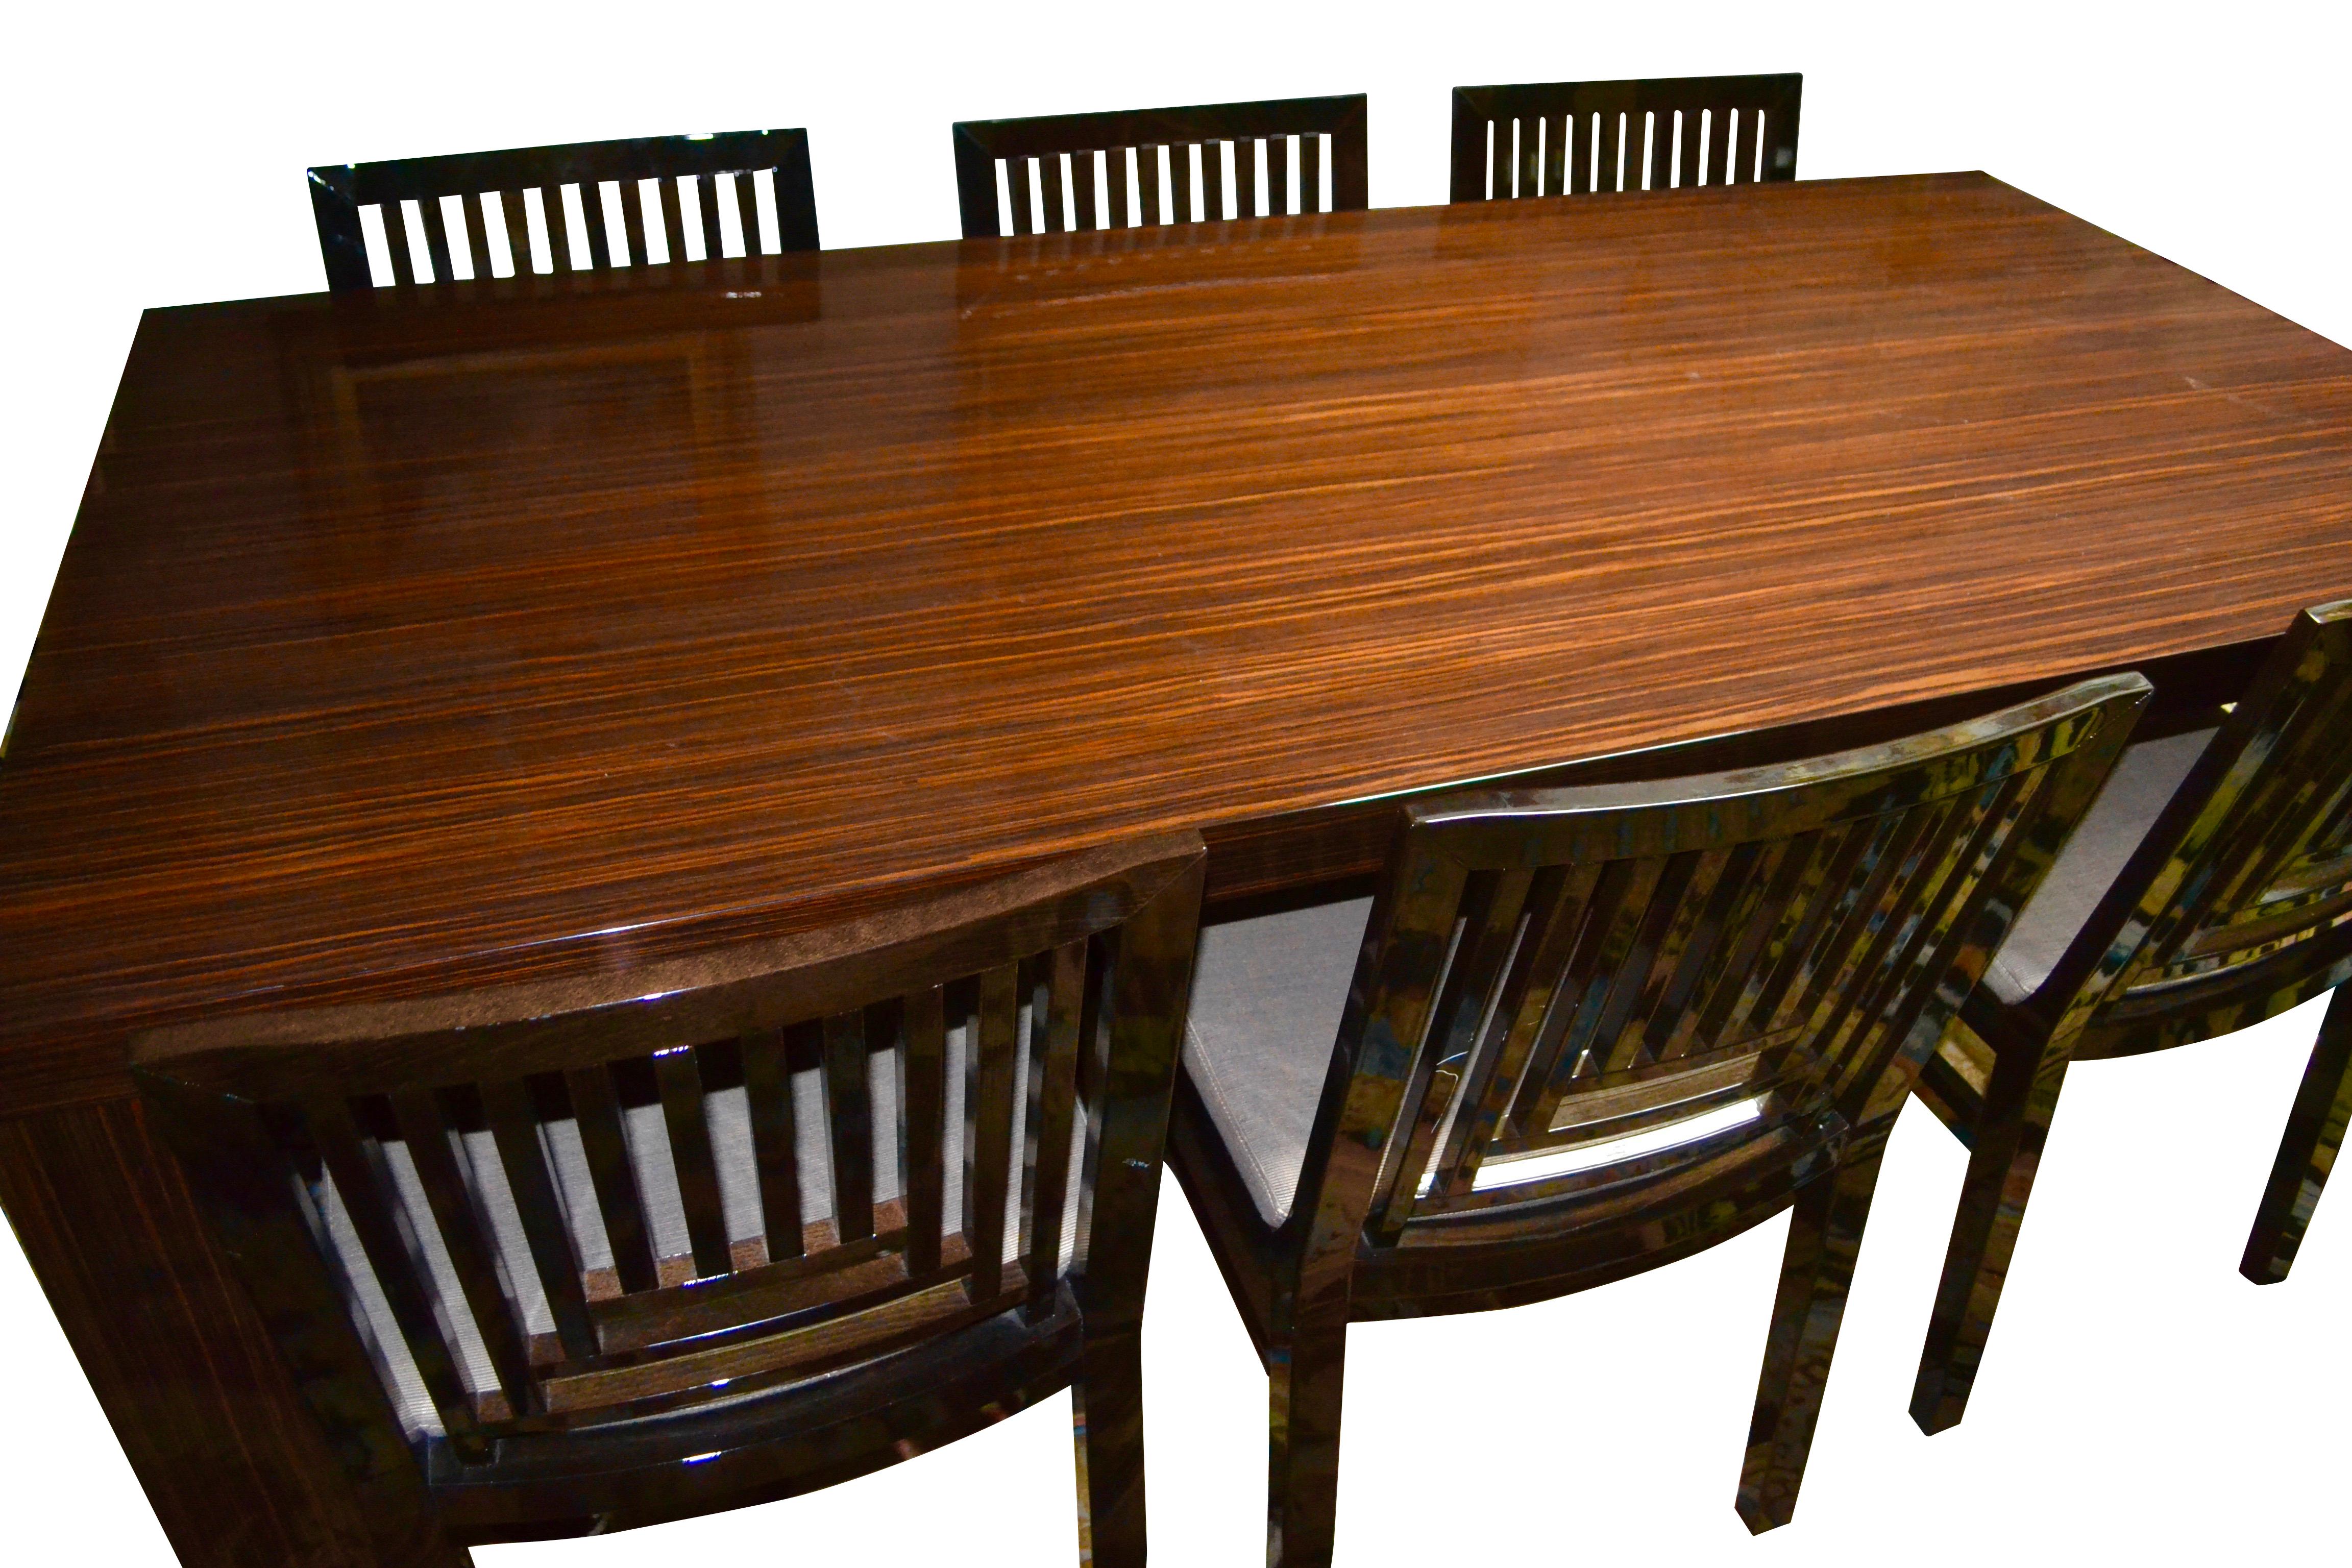 Contemporary Art Deco Style Macassar Ebony Dining Table and Chairs